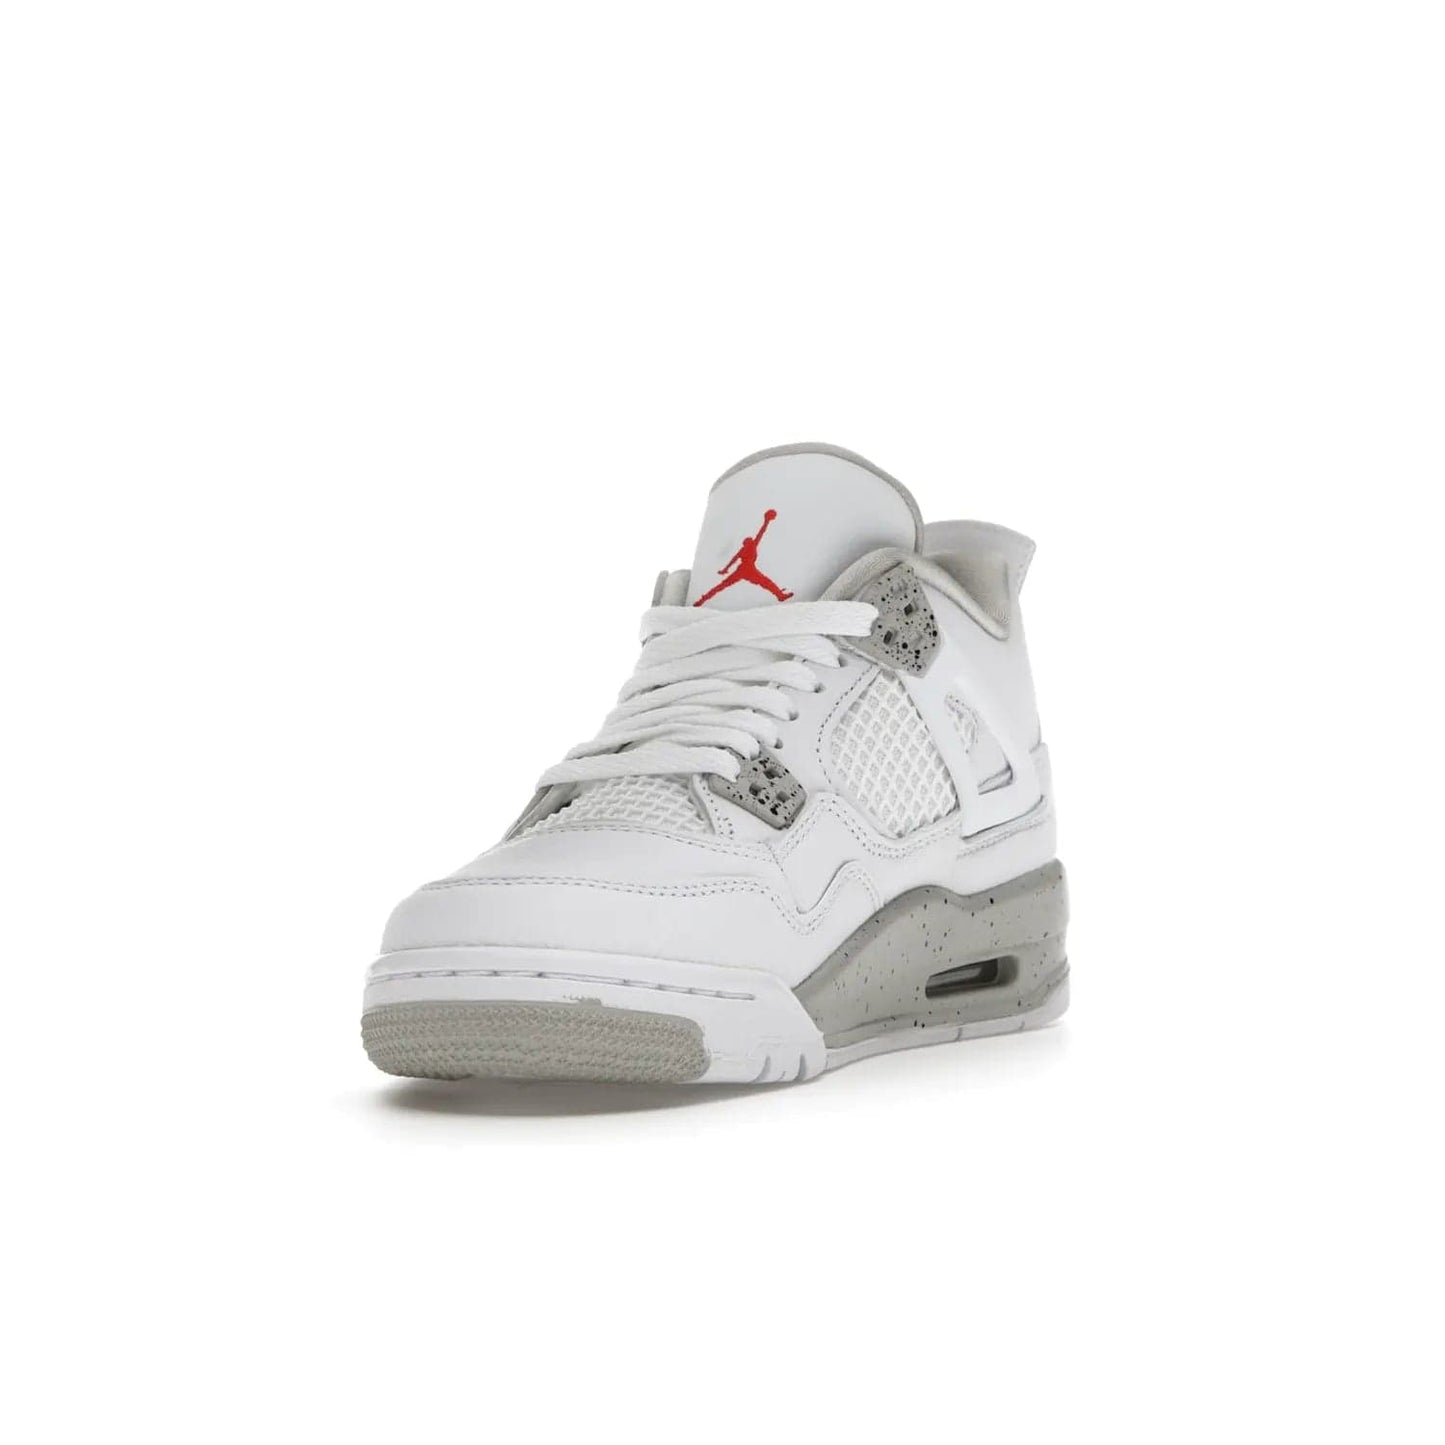 Jordan 4 Retro White Oreo (2021) (GS) - Image 13 - Only at www.BallersClubKickz.com - White Oreo Air Jordan 4 Retro 2021 GS - Iconic sneaker silhouette with white canvas upper, Tech Grey detailing, and Fire Red accents. Available July 2021.